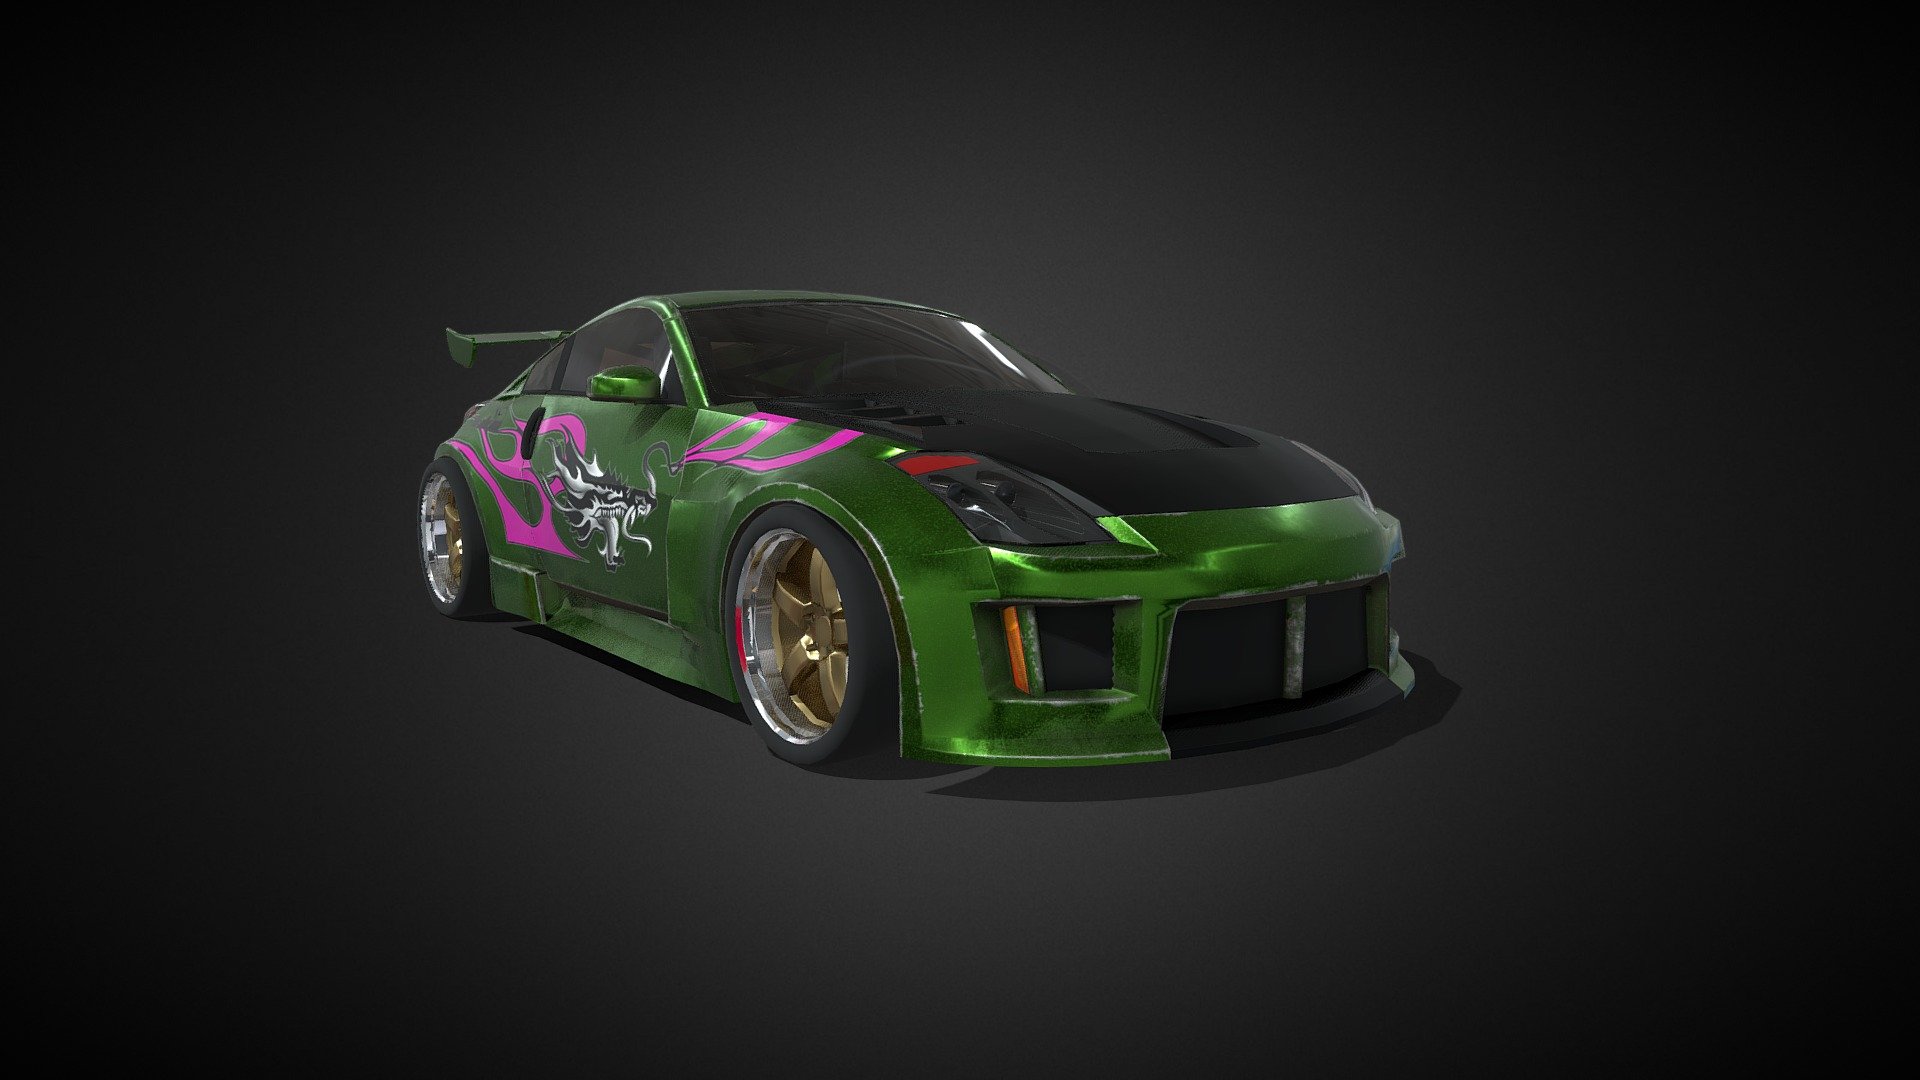 Time  for another nfs legend! Hope you like it.
Takea look to the other models in my prifle if you love cars - Rachel`s 350z NFS U2 - Download Free 3D model by memoov (@movartD) 3d model